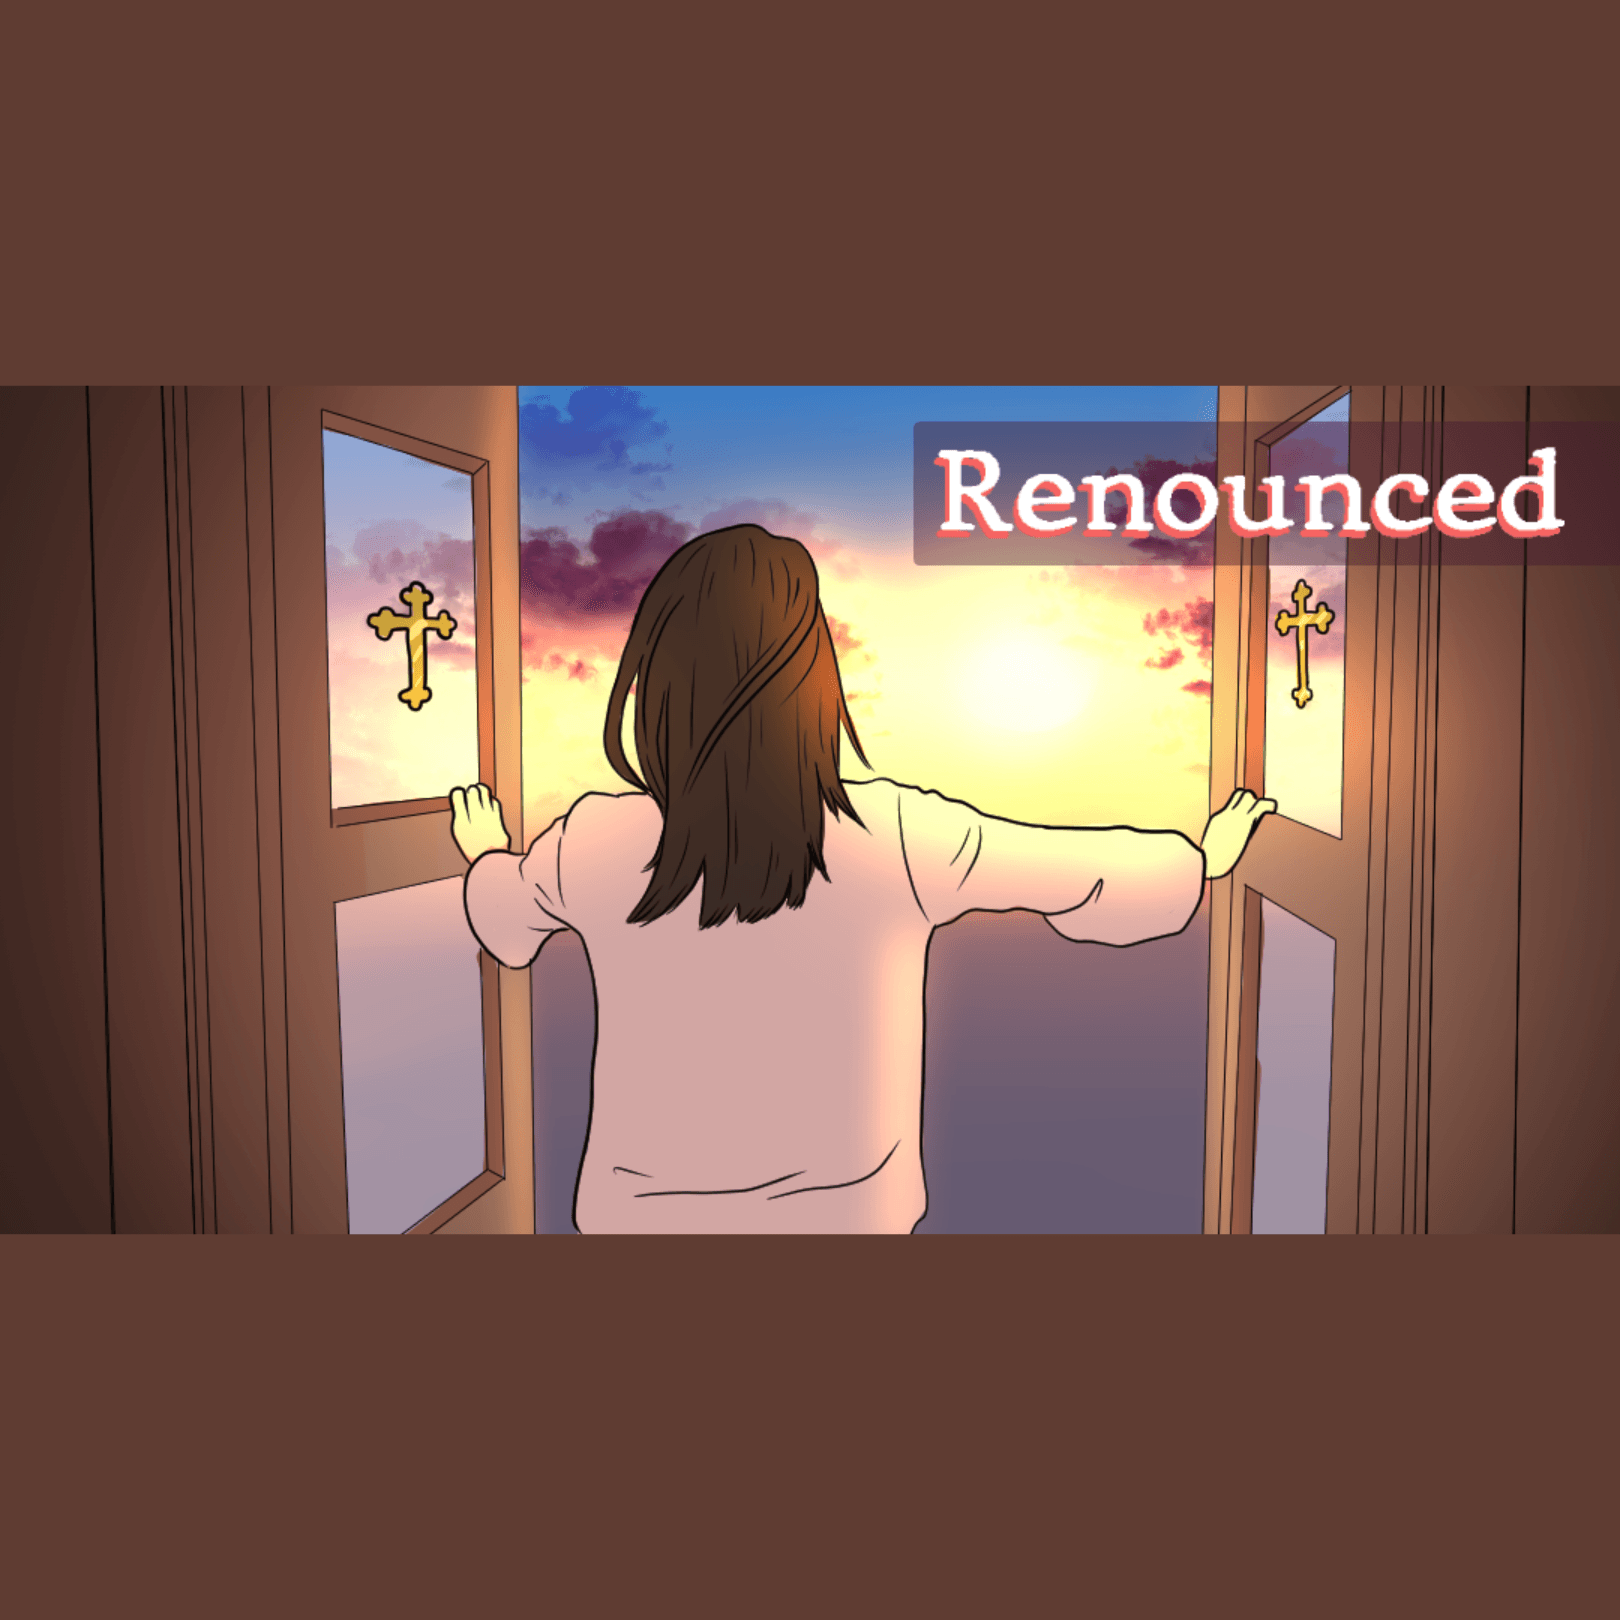 Thumbnail for "Renounced: Leaving A Religious Community".